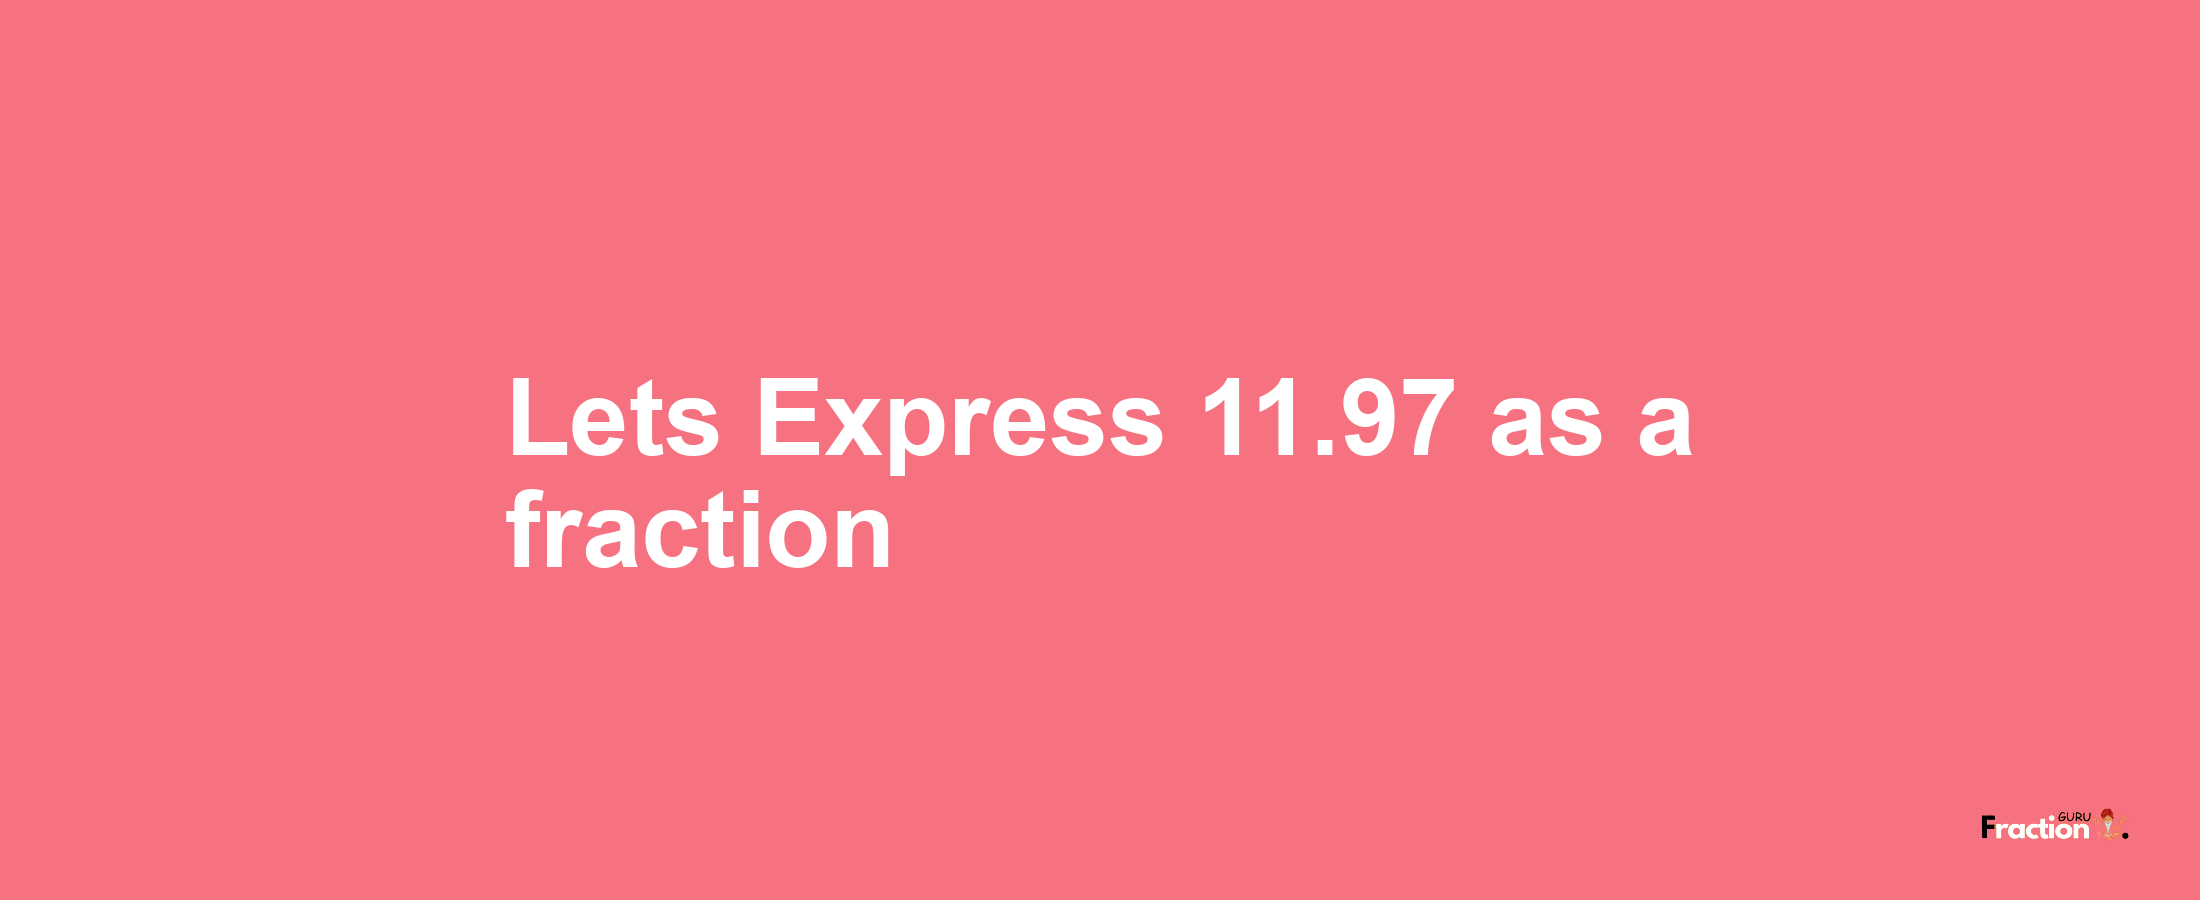 Lets Express 11.97 as afraction